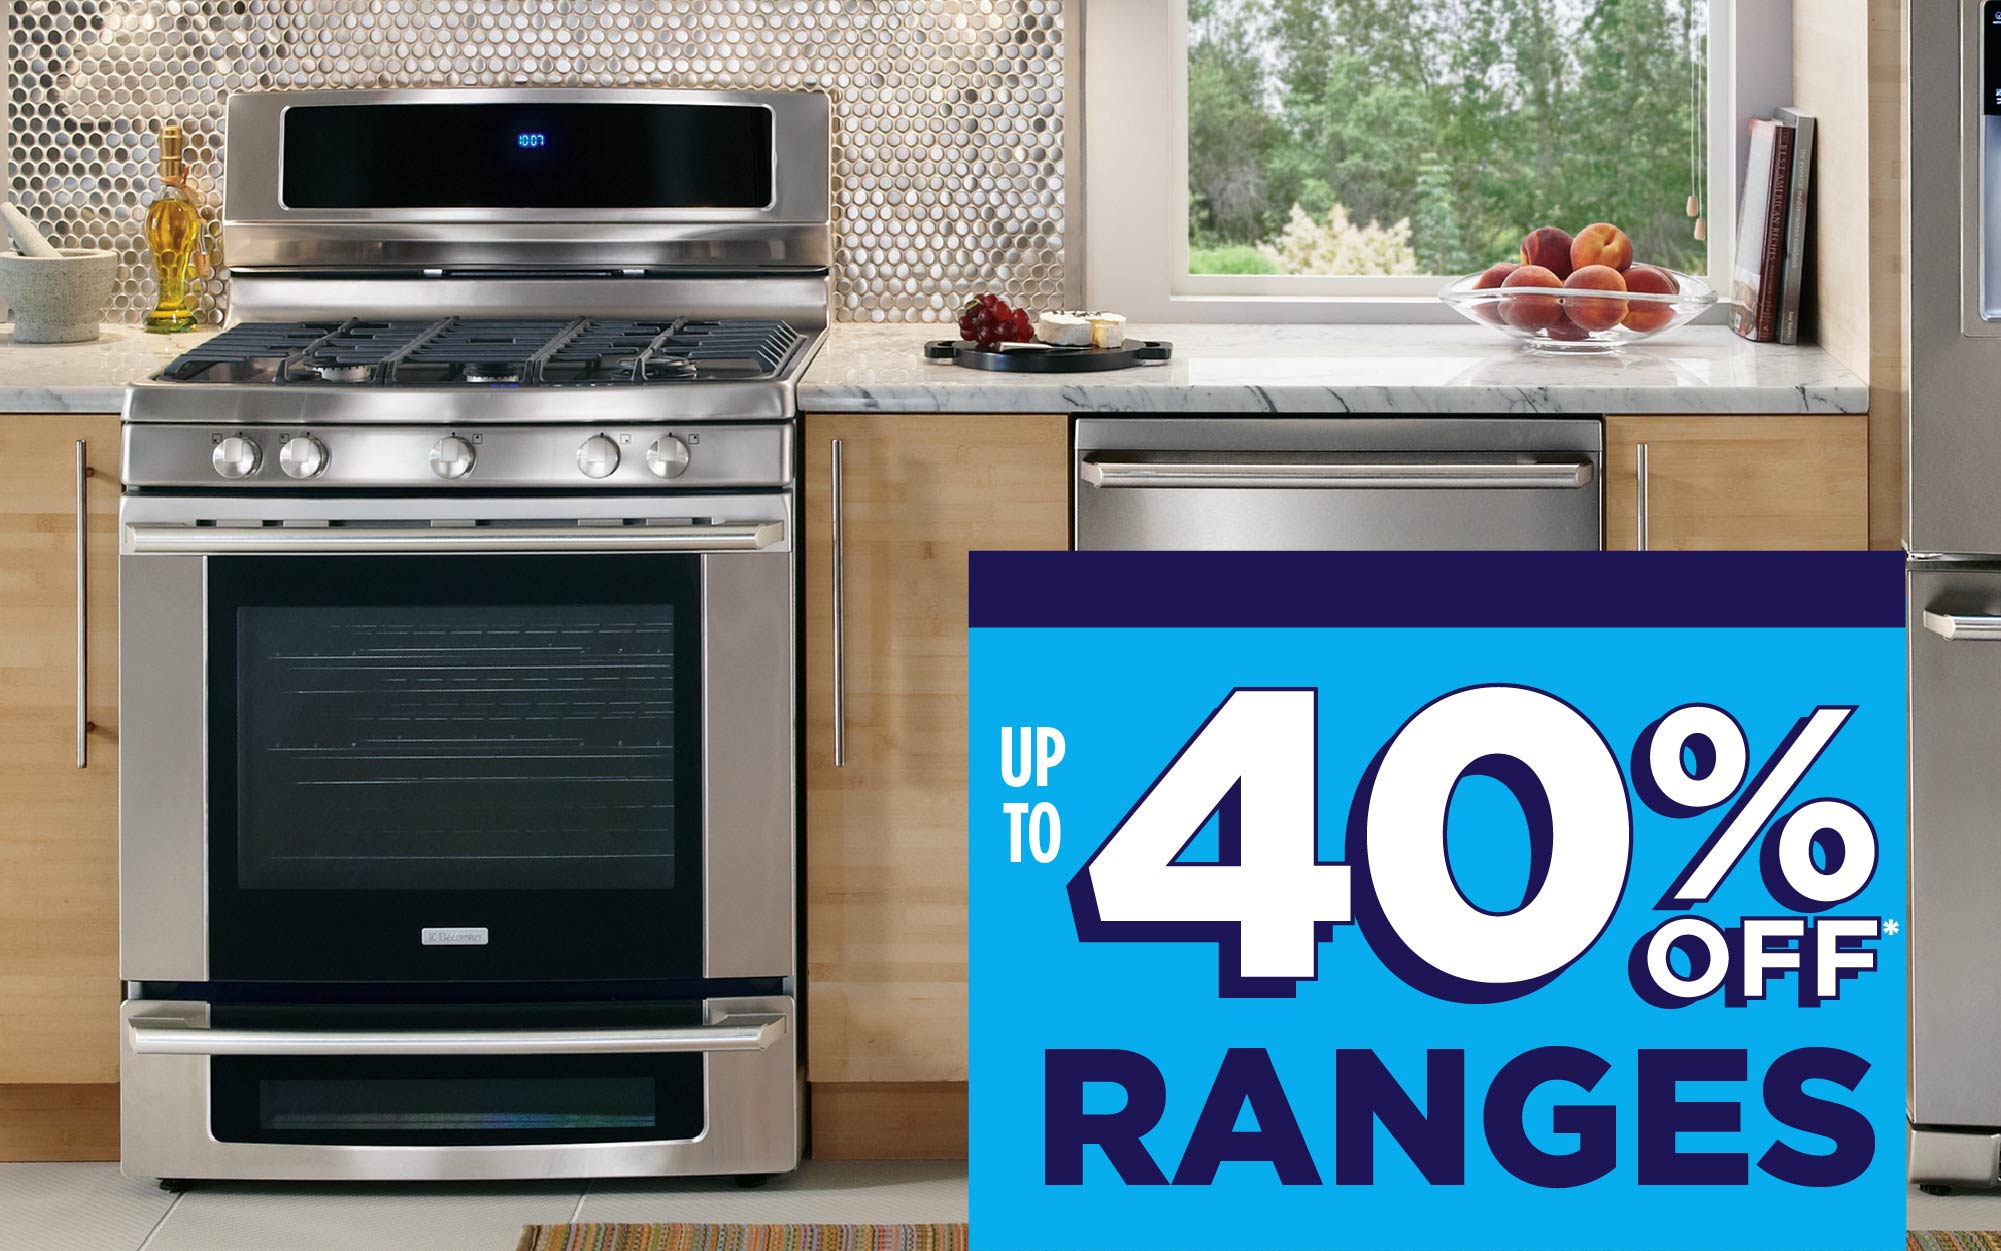 up to 40% Off Ranges!